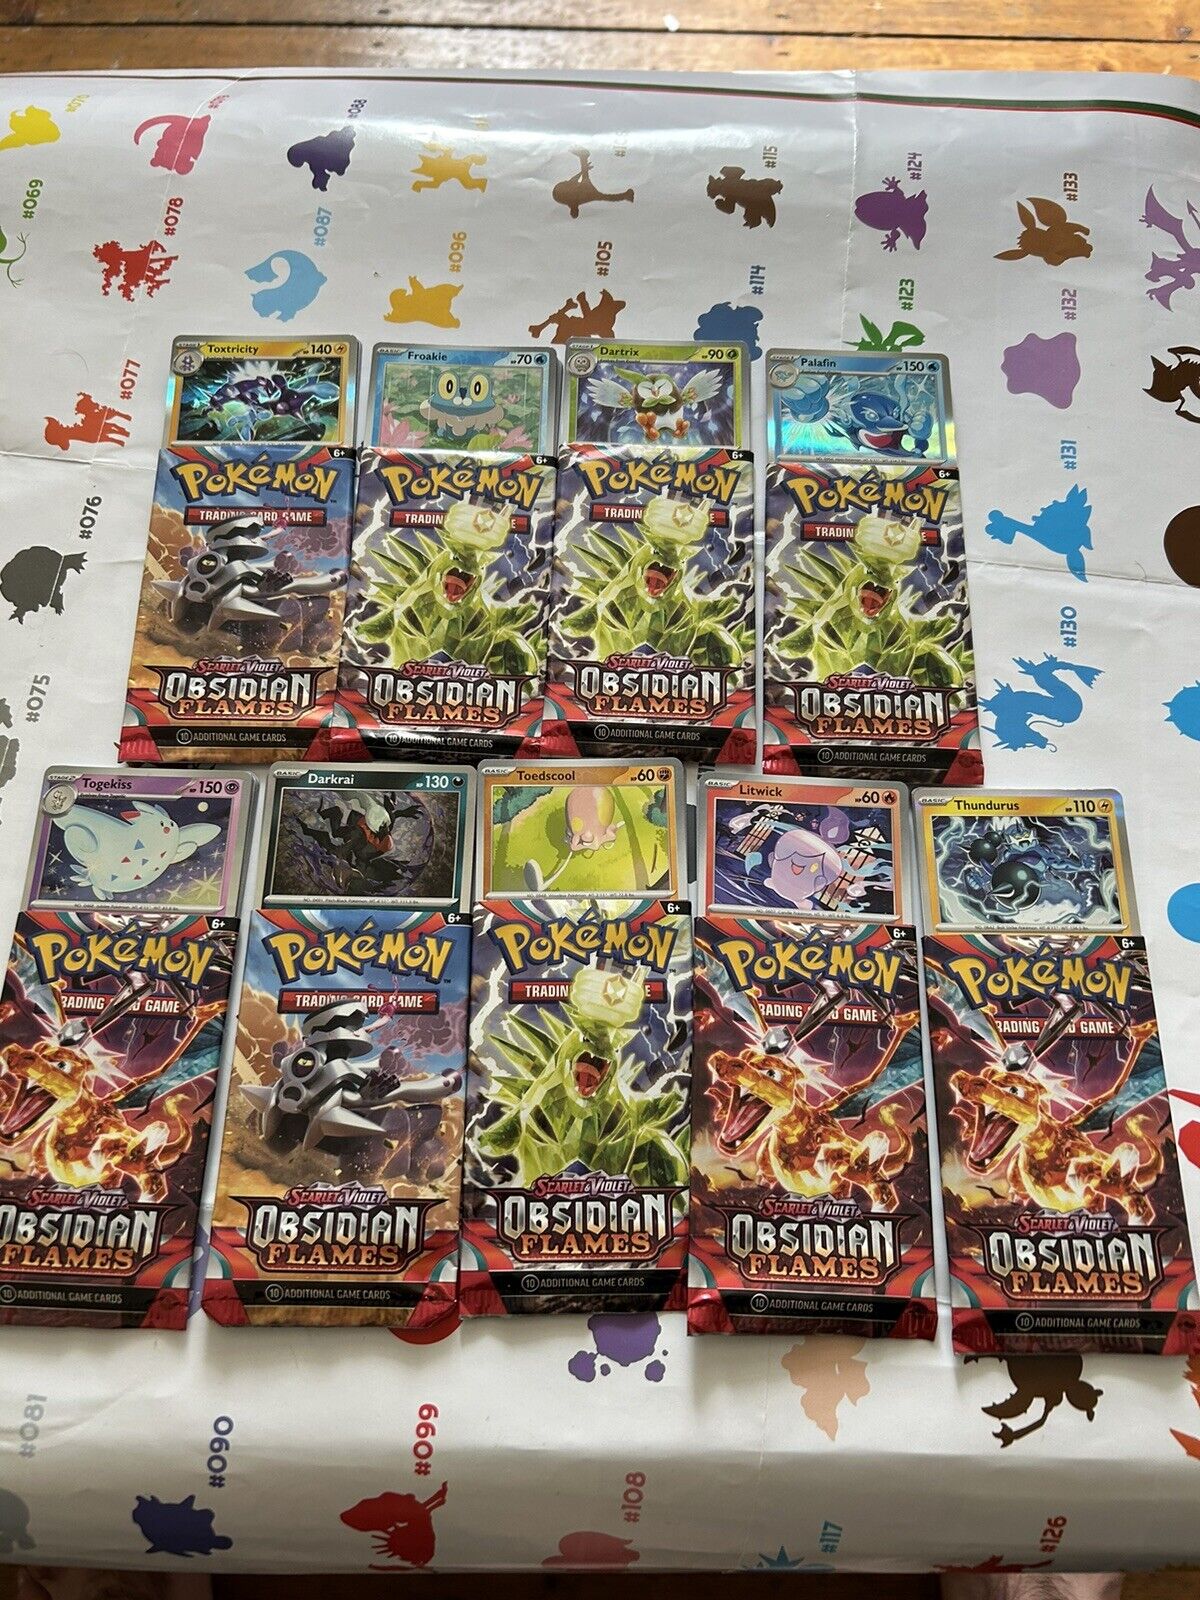 9x Obsidian Flames Pokemon Card Packs Opened But Still Holos And Reverses inside